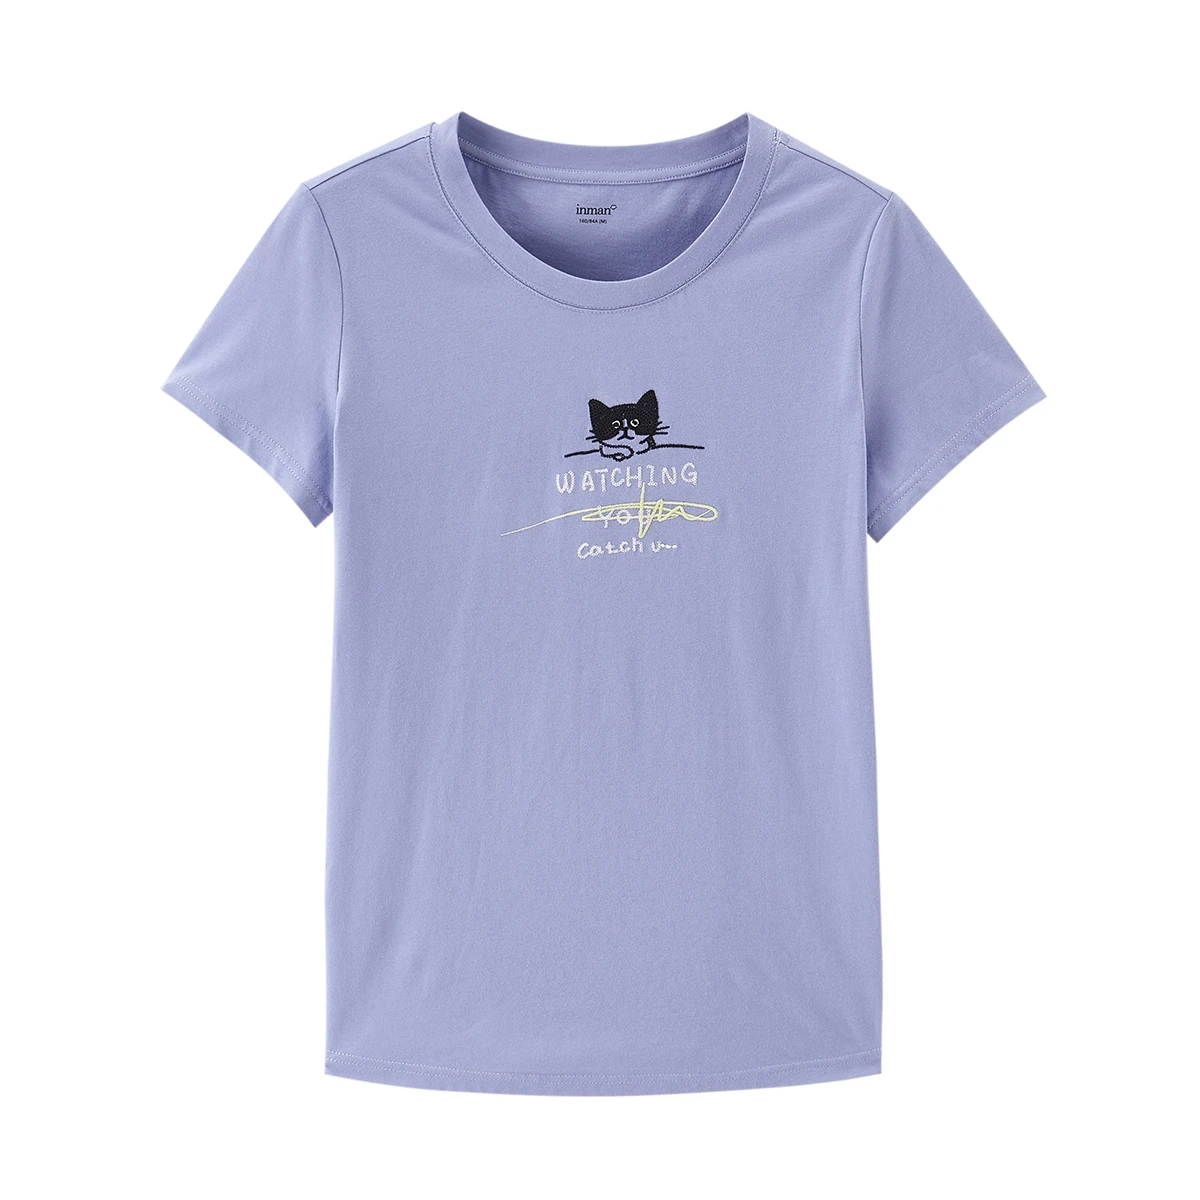 

INMAN Funny Pattern T-Shirt Paillette Cute Cat Embroidery O-Neck Girl Causal Minimal Design Tops